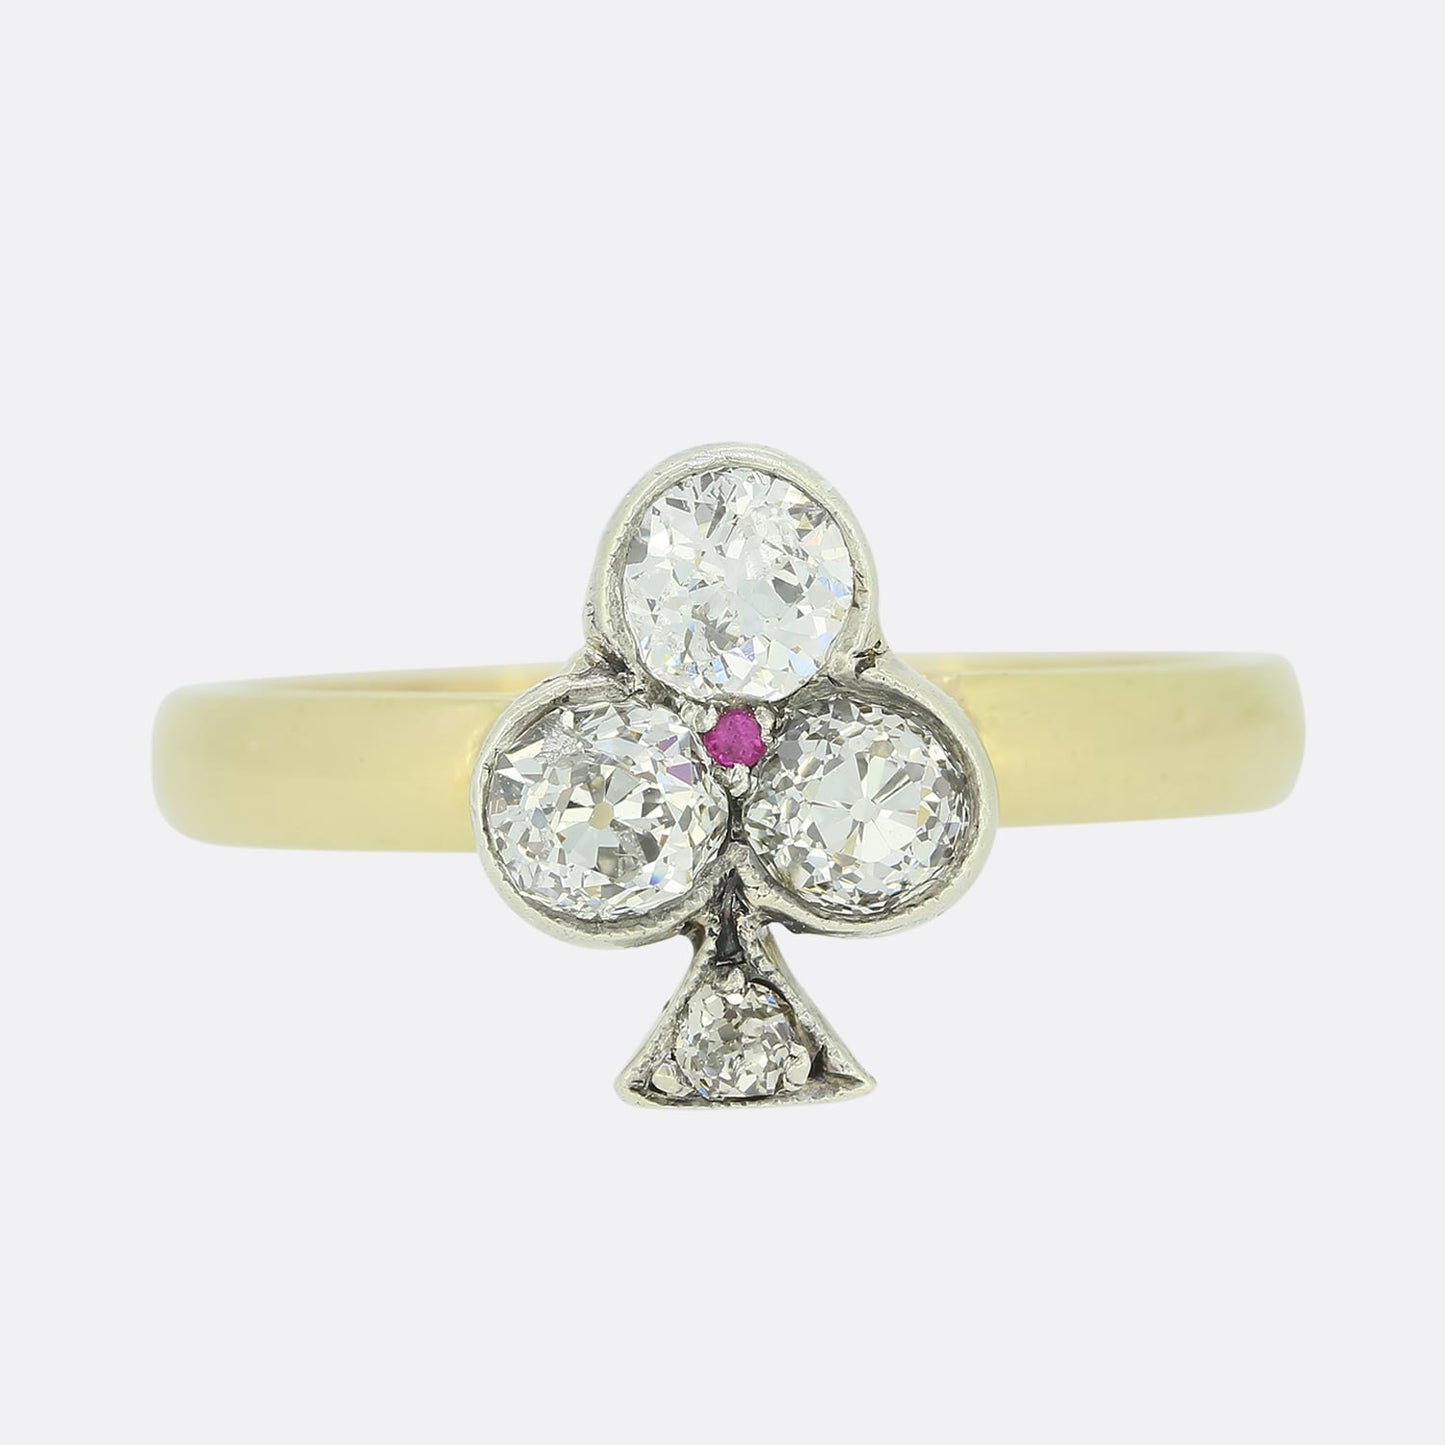 0.62 Carat Old Cut Diamond and Ruby Clover Ring